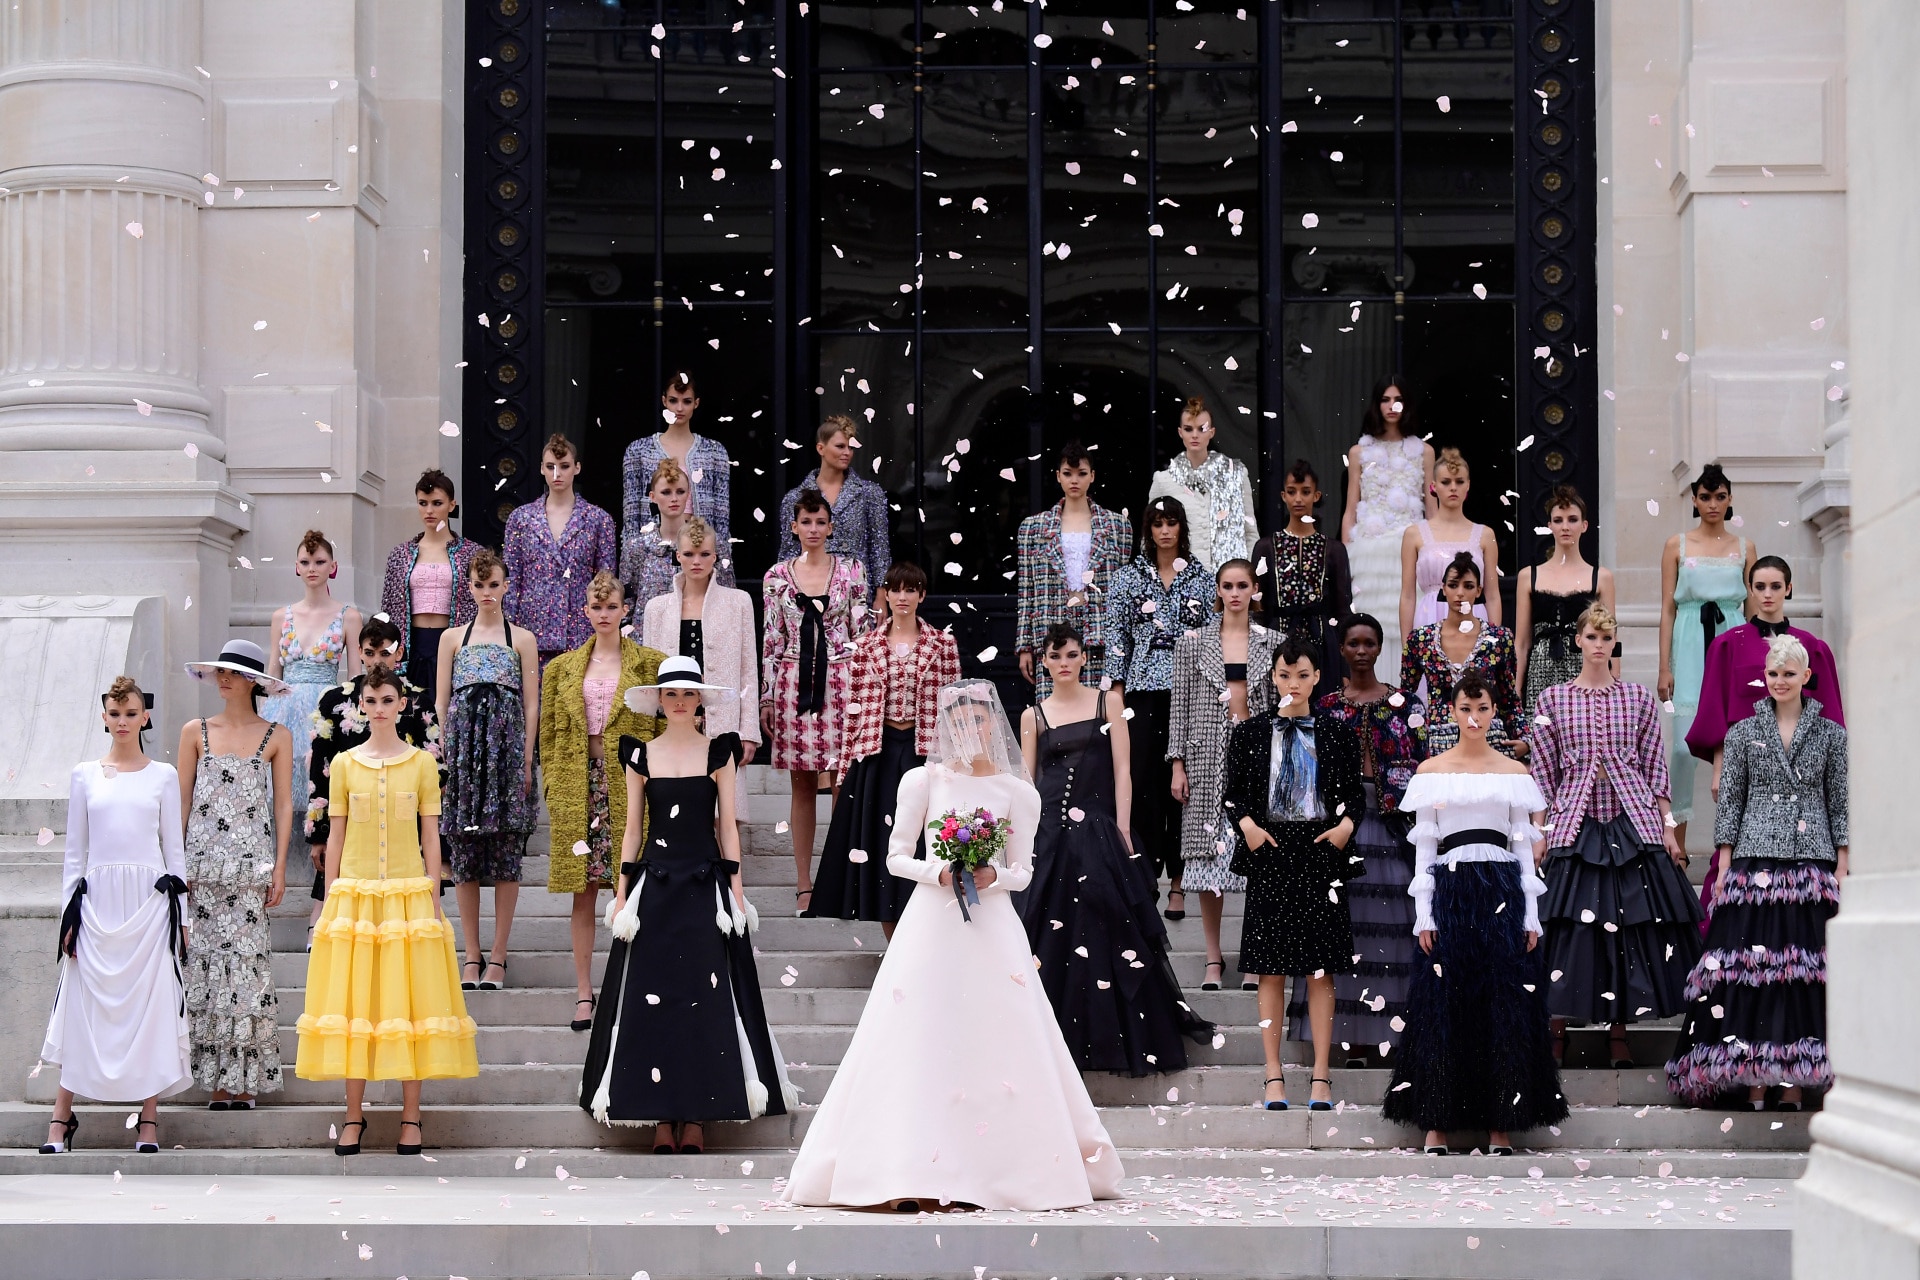 Chanel's 2021 haute couture collection is an Impressionist